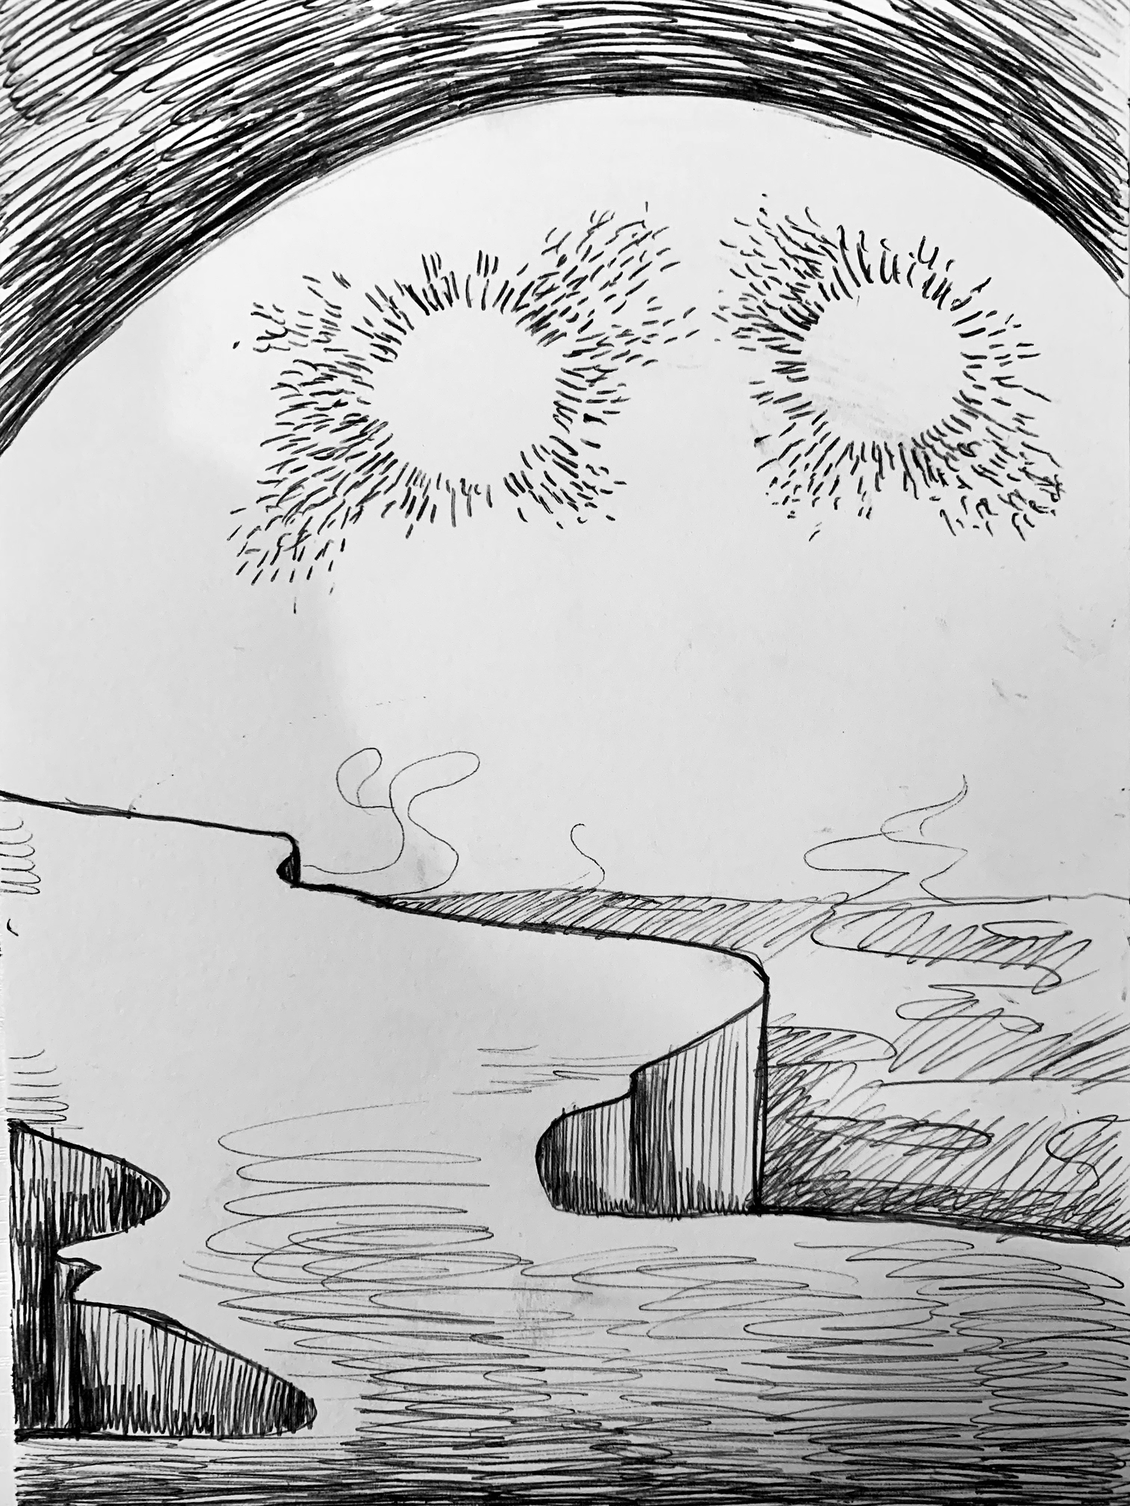 a sketch of what appears to be the view from inside a cave near water, with two bright suns in the sky